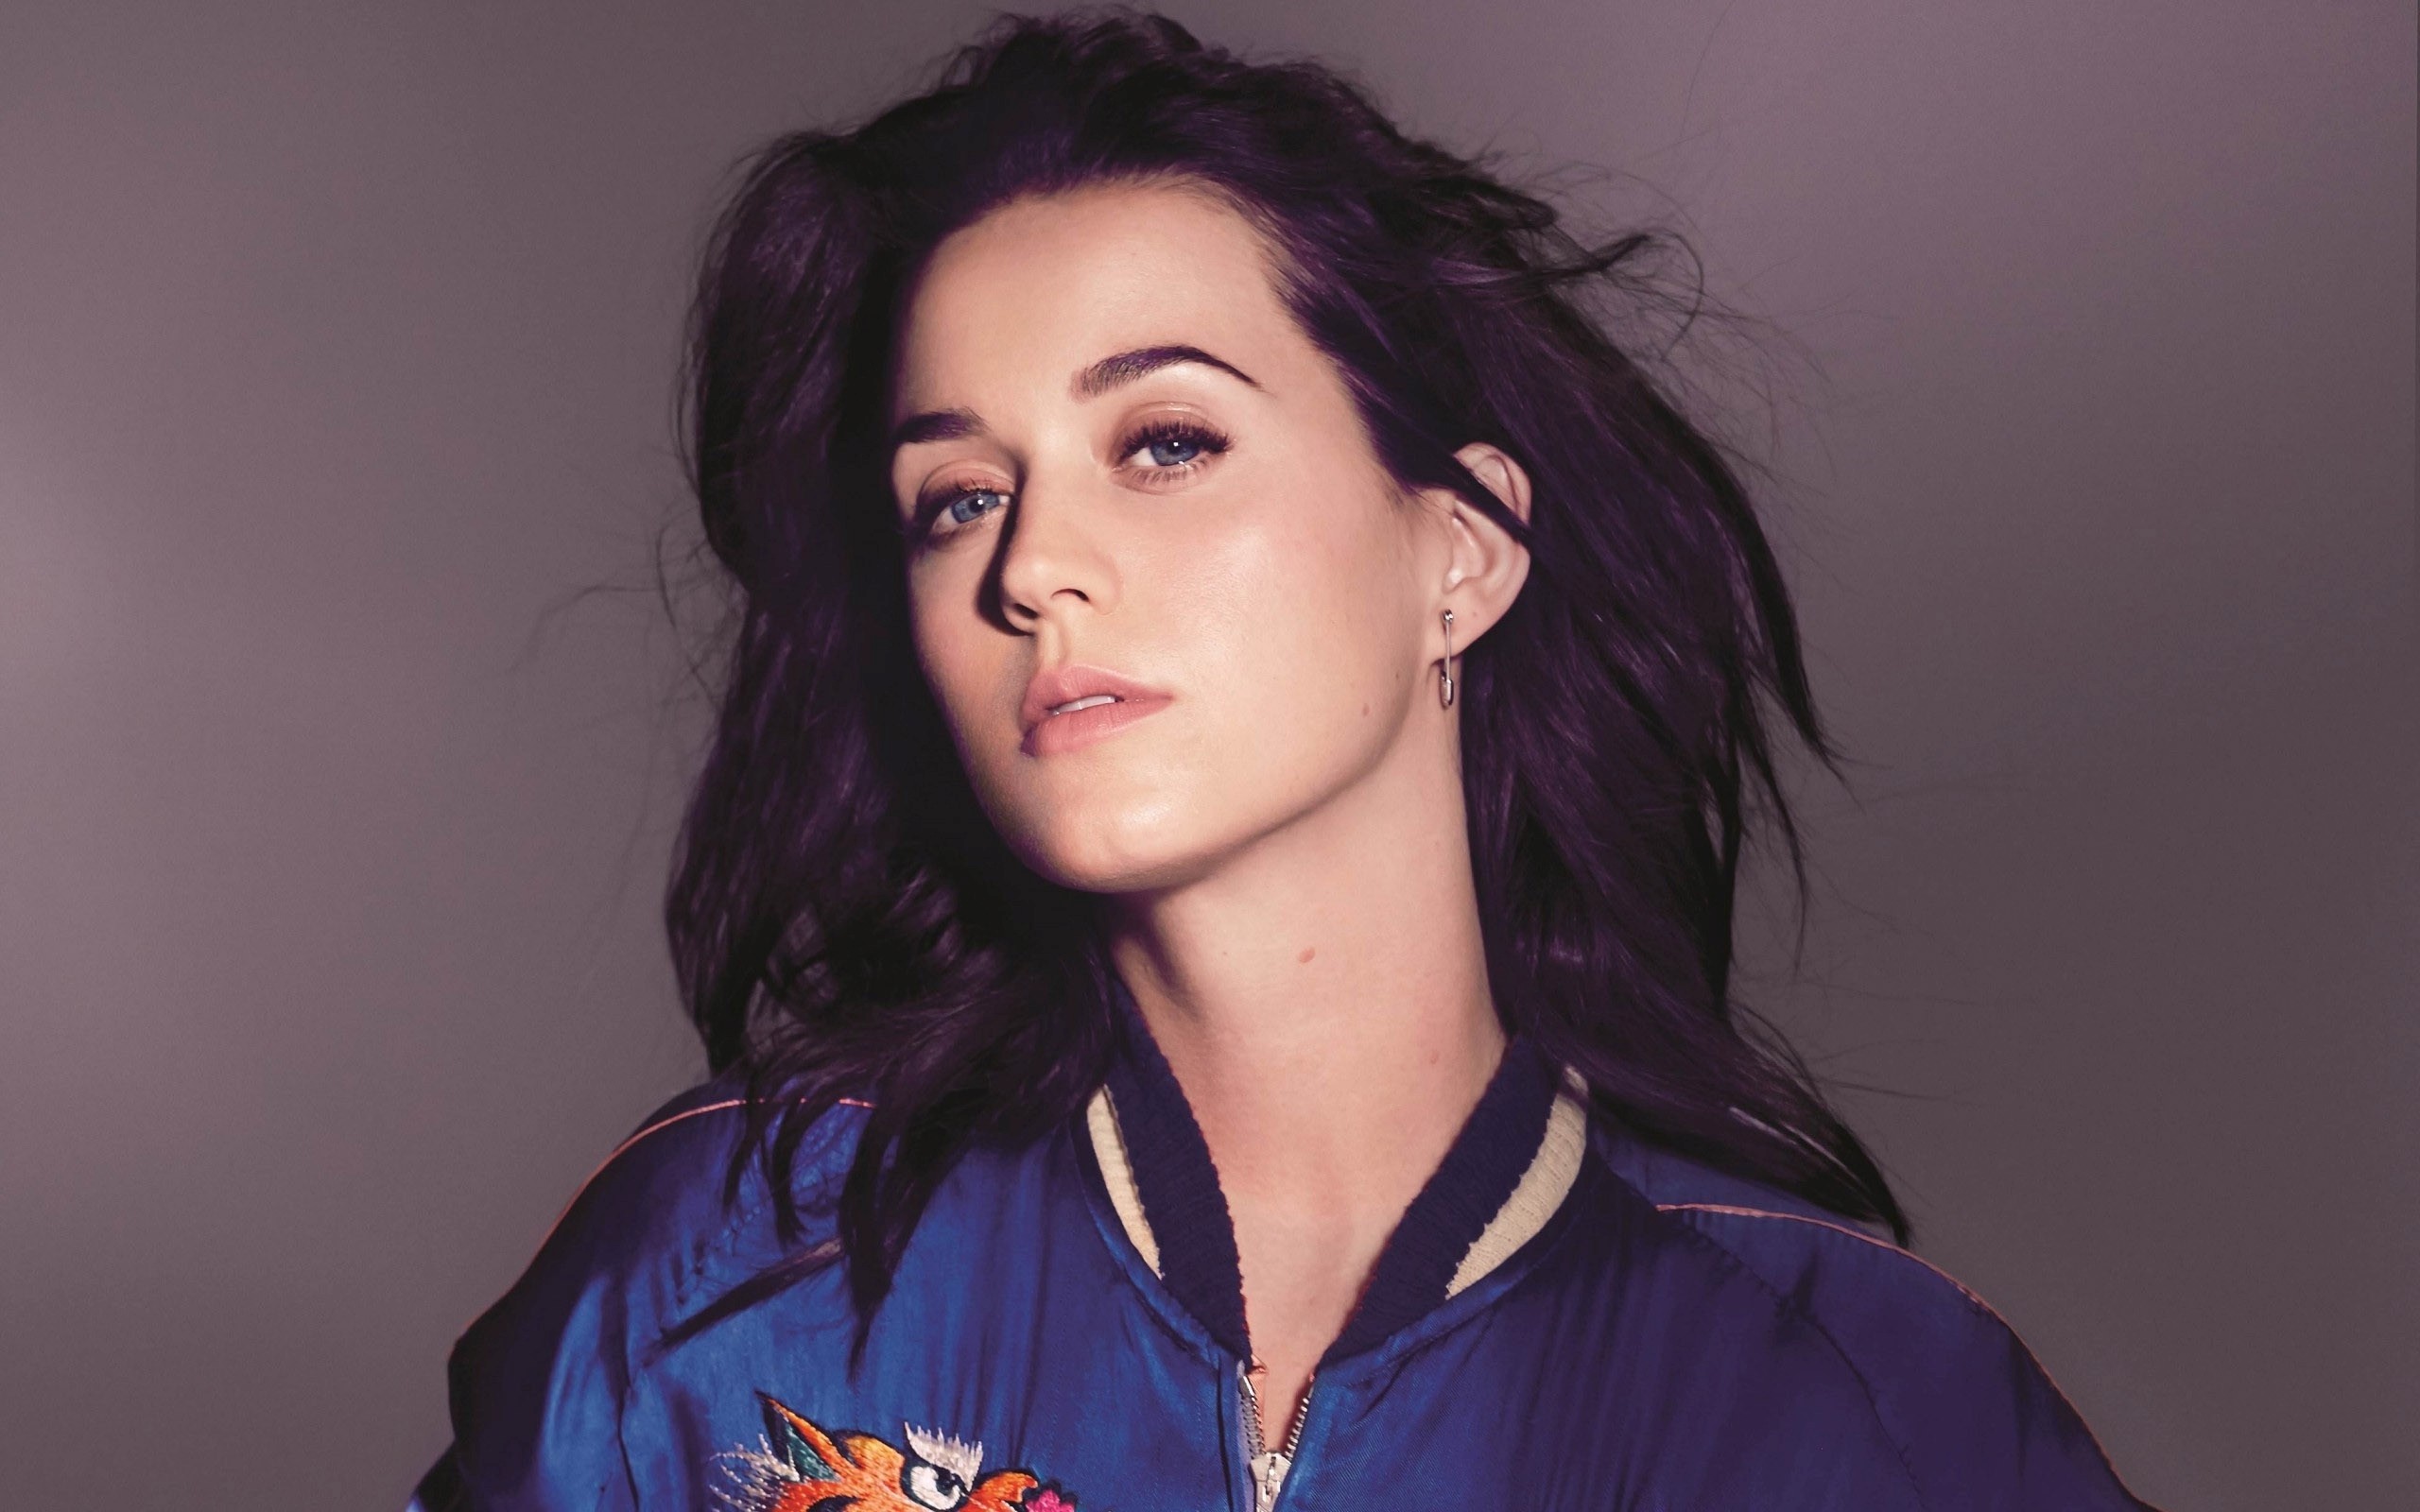 Wallpapers Of Katy Perry